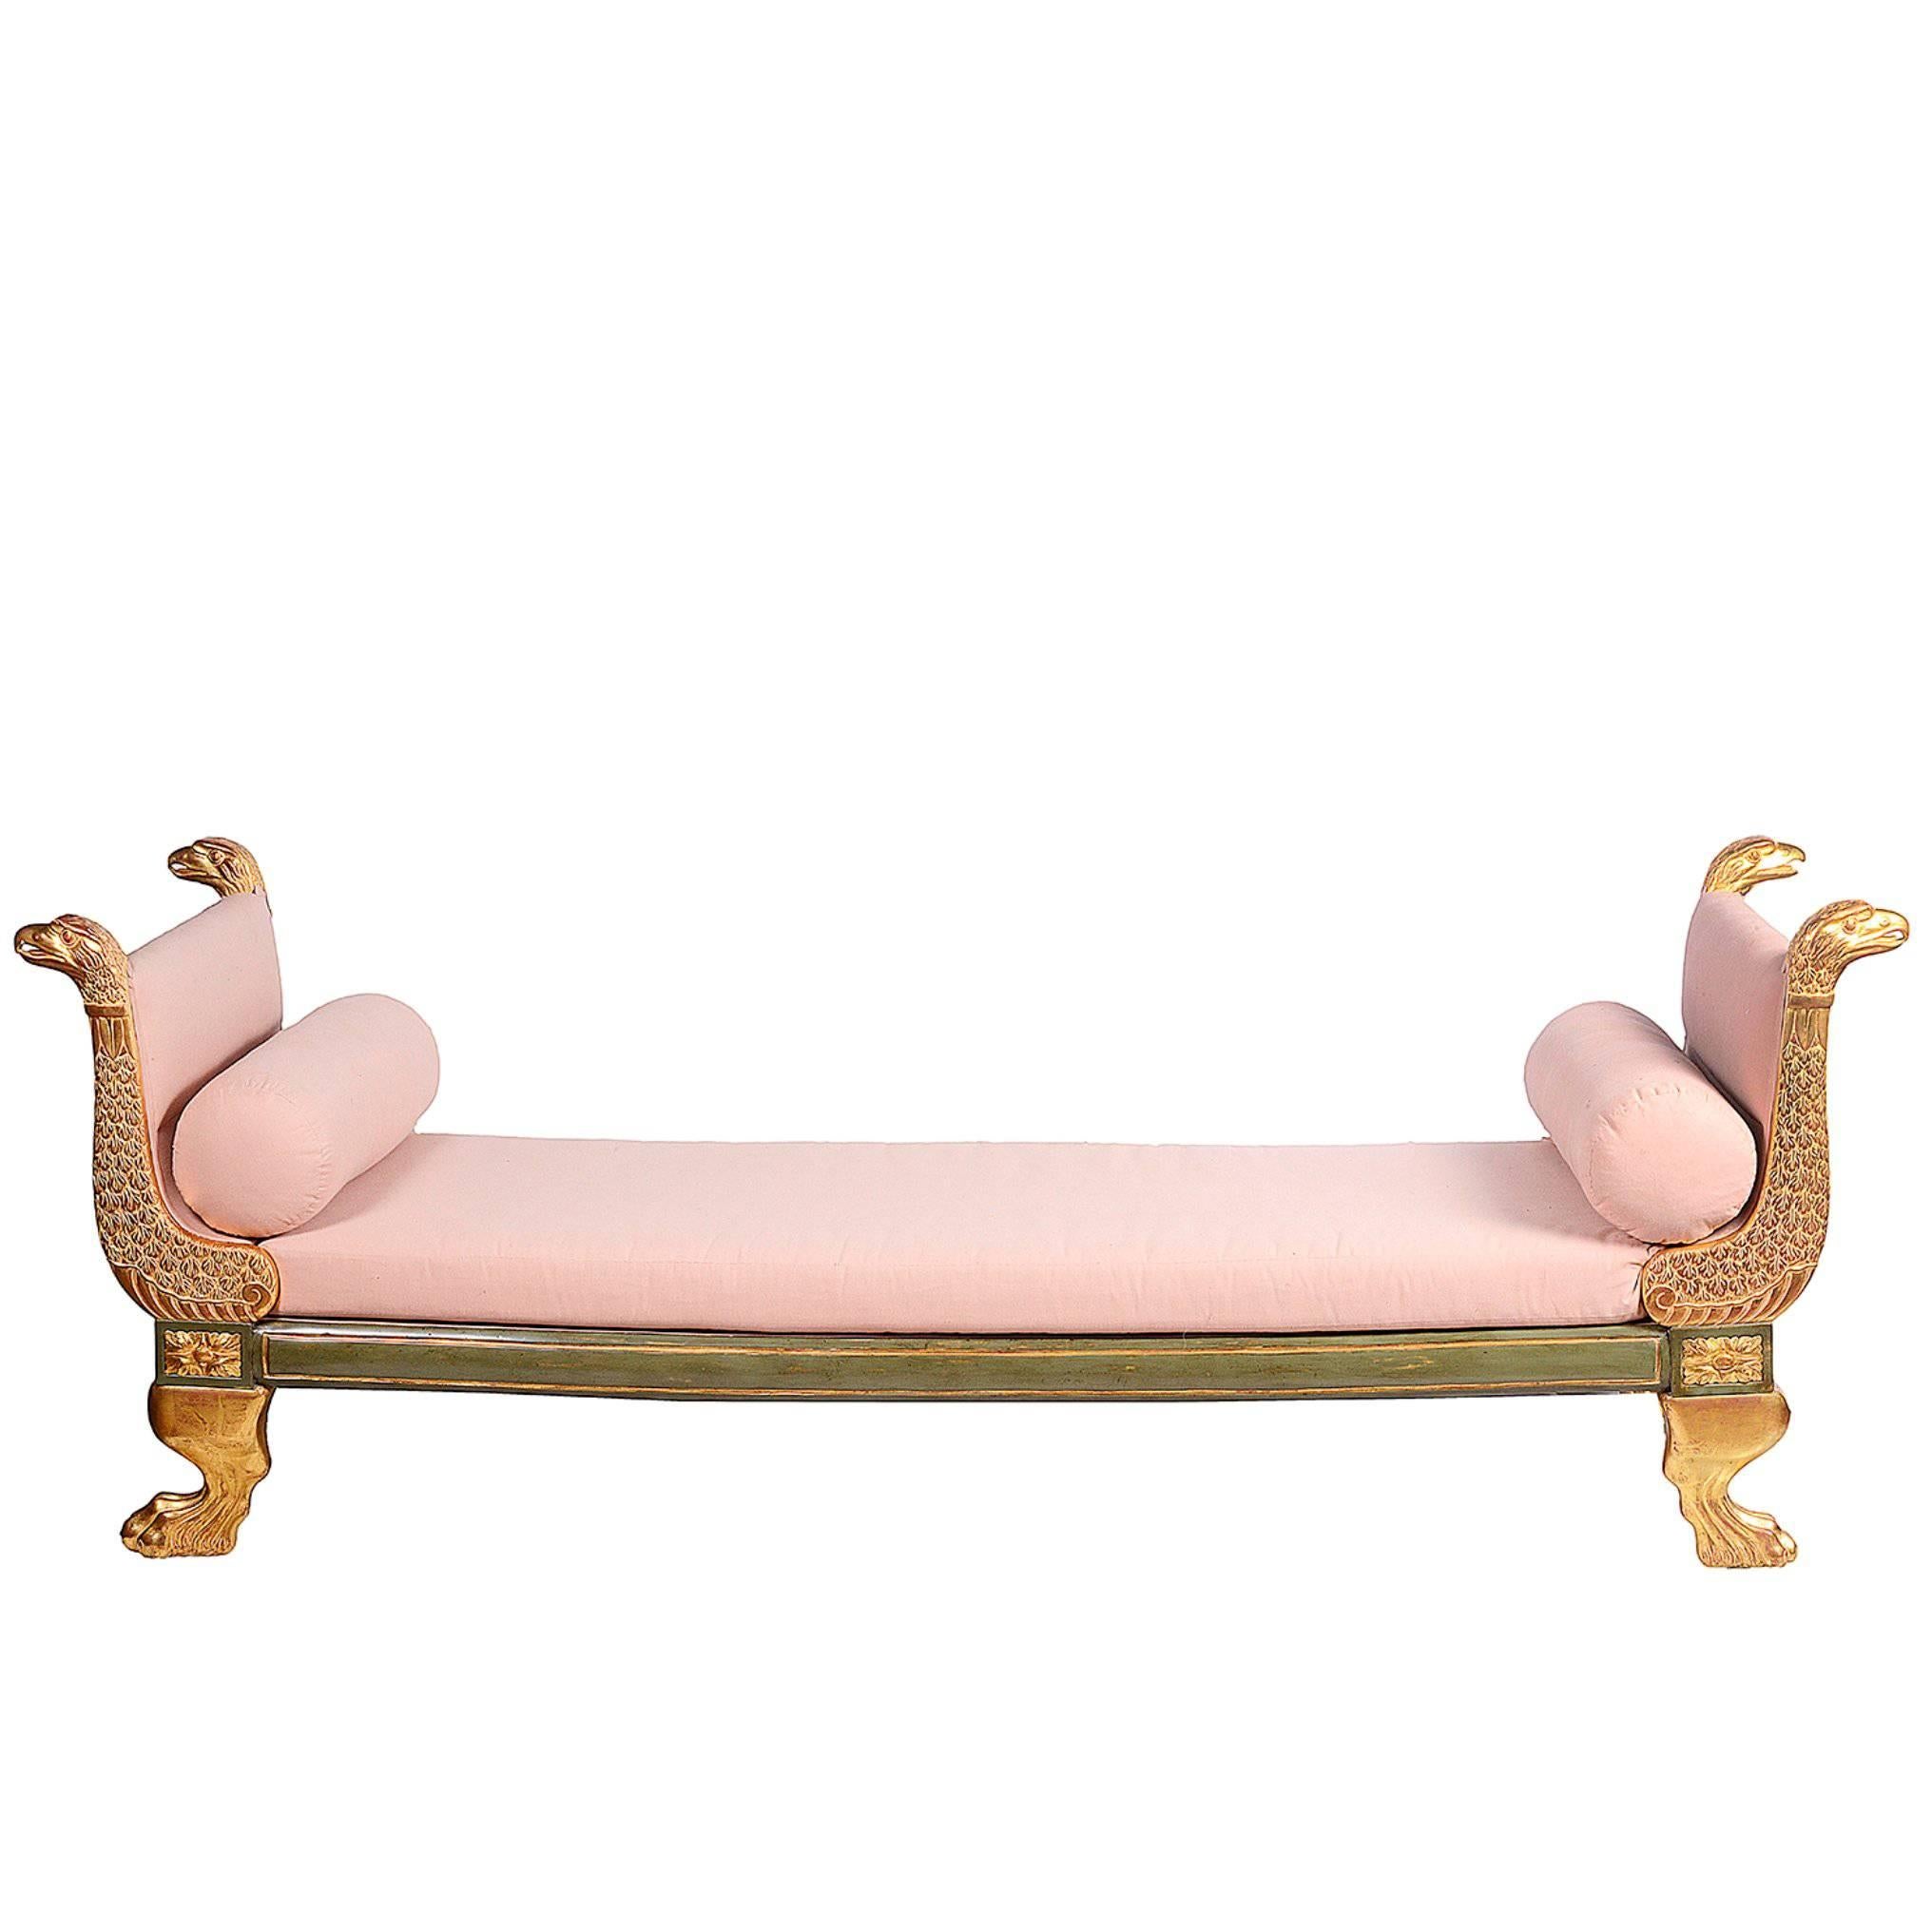 Regency Influenced Carved Giltwood Daybed